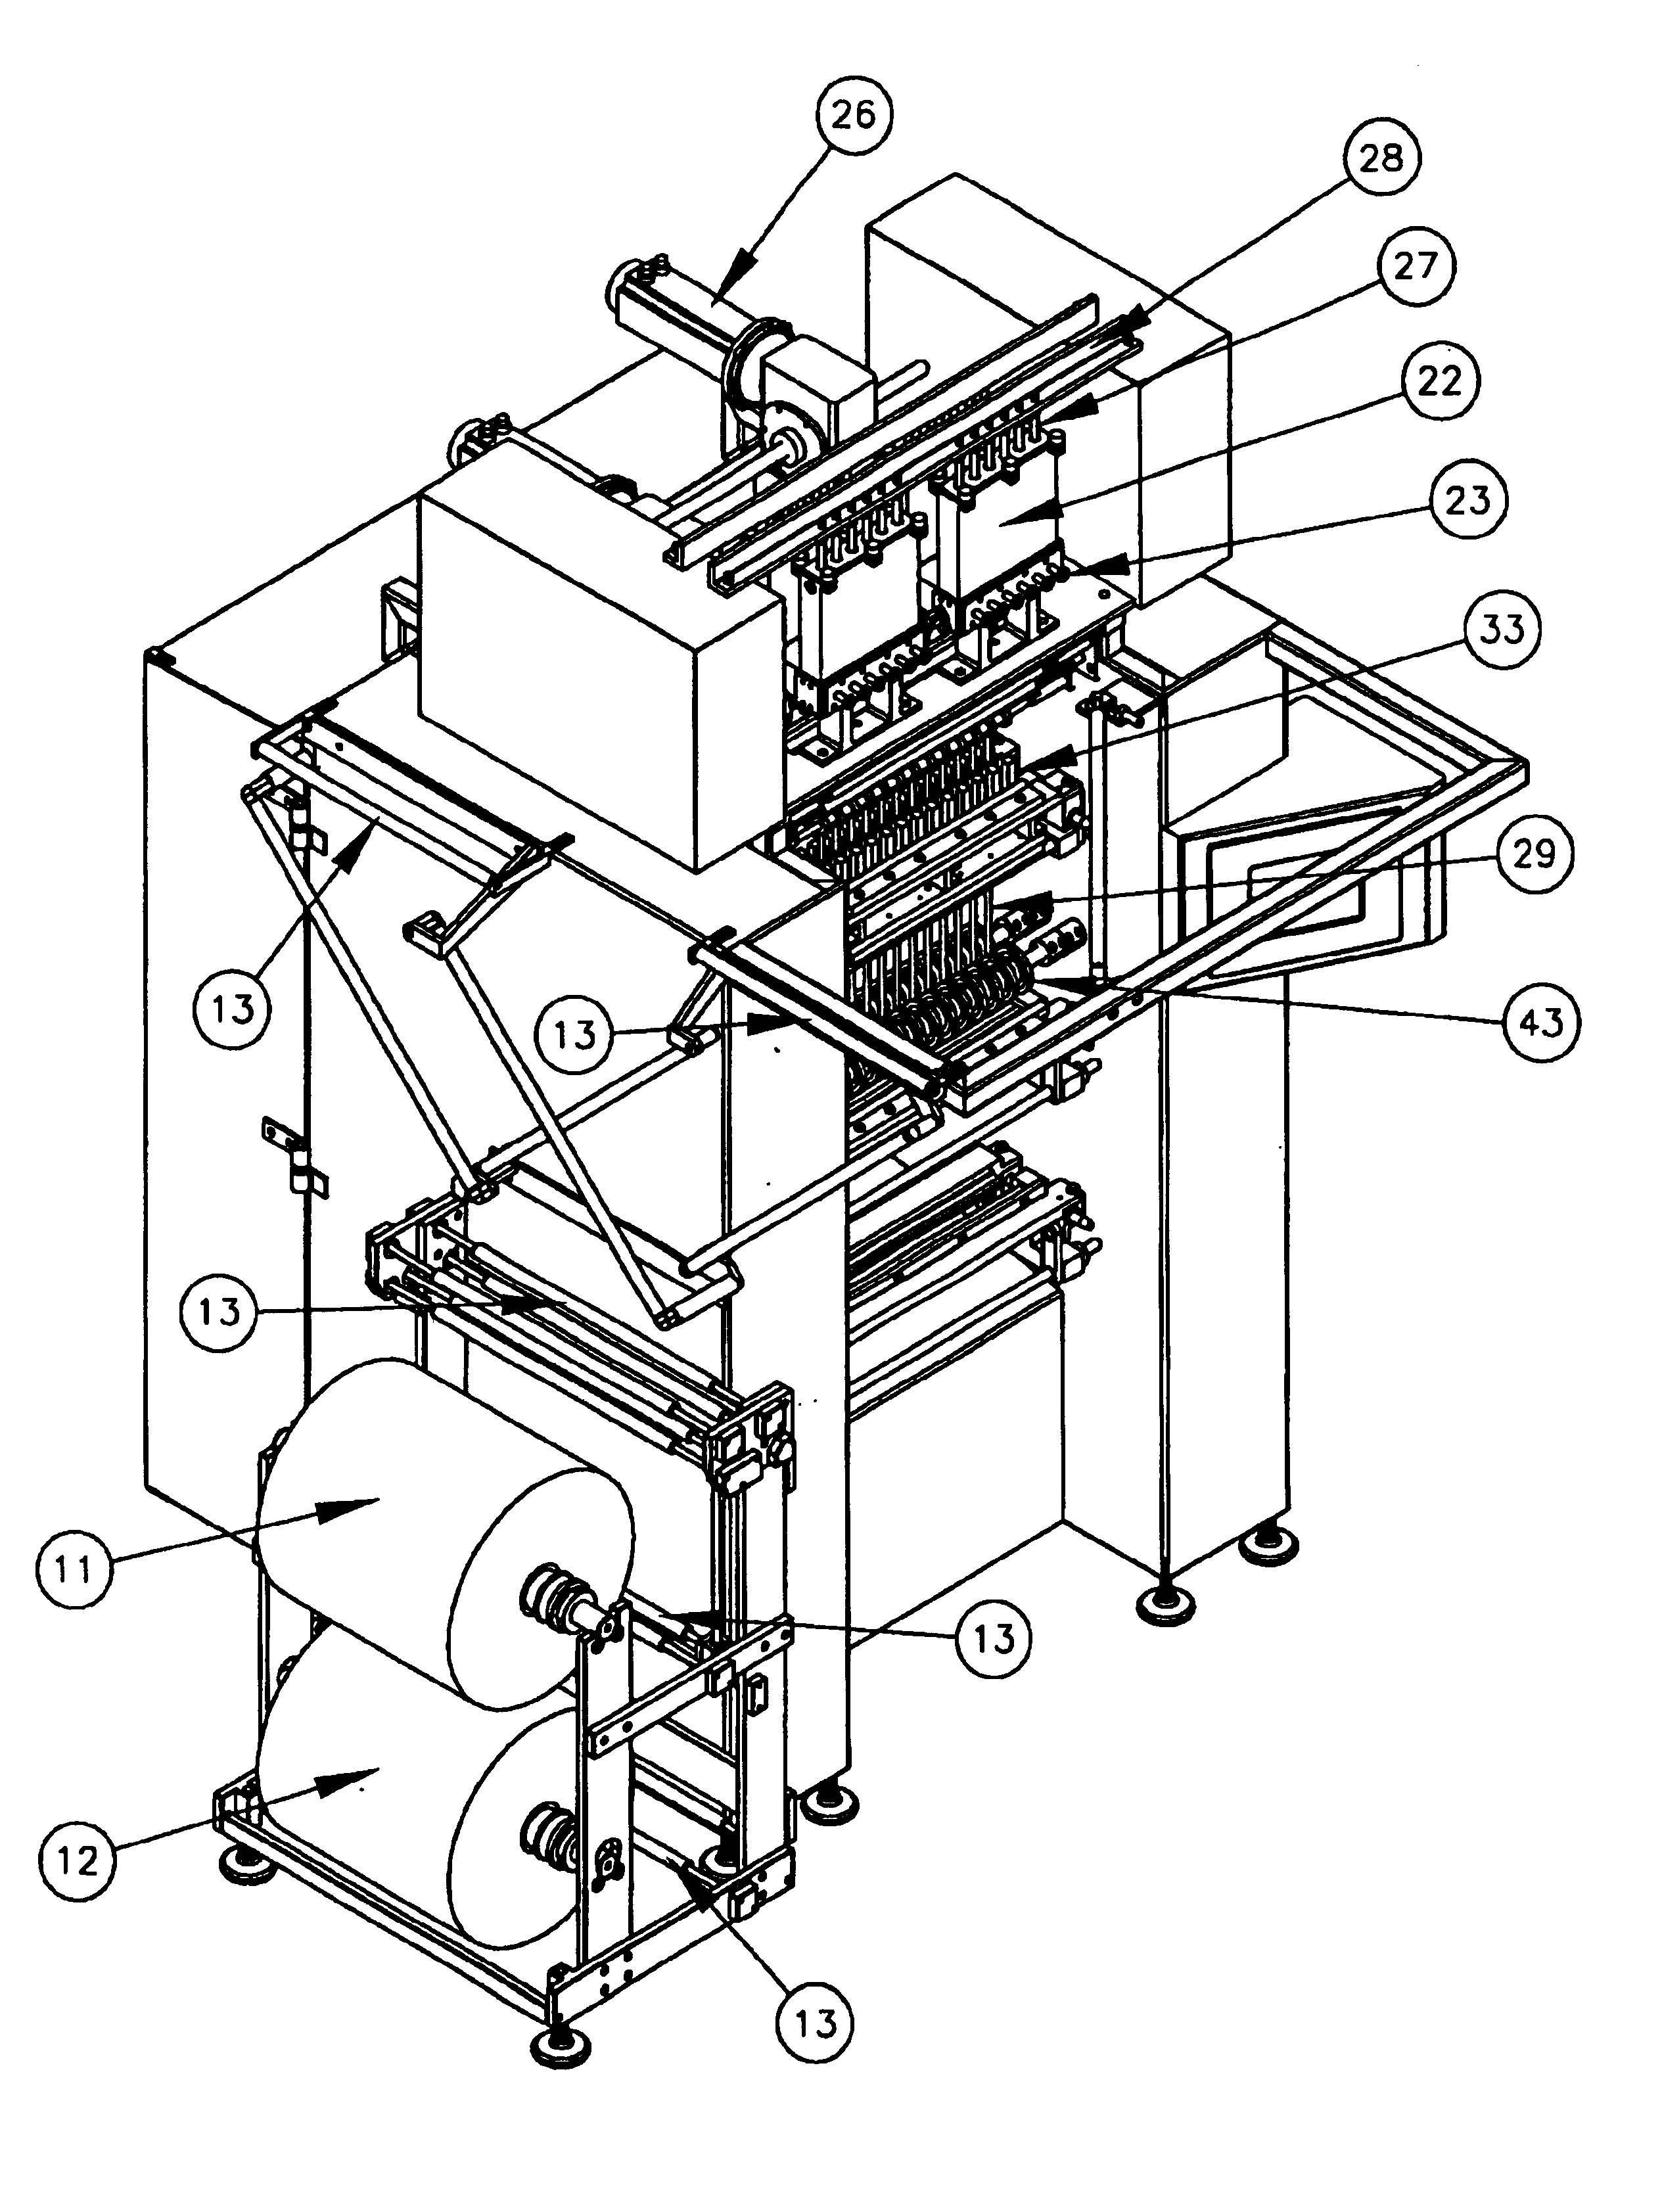 High-speed continuous action form-fill-seal machine and methods